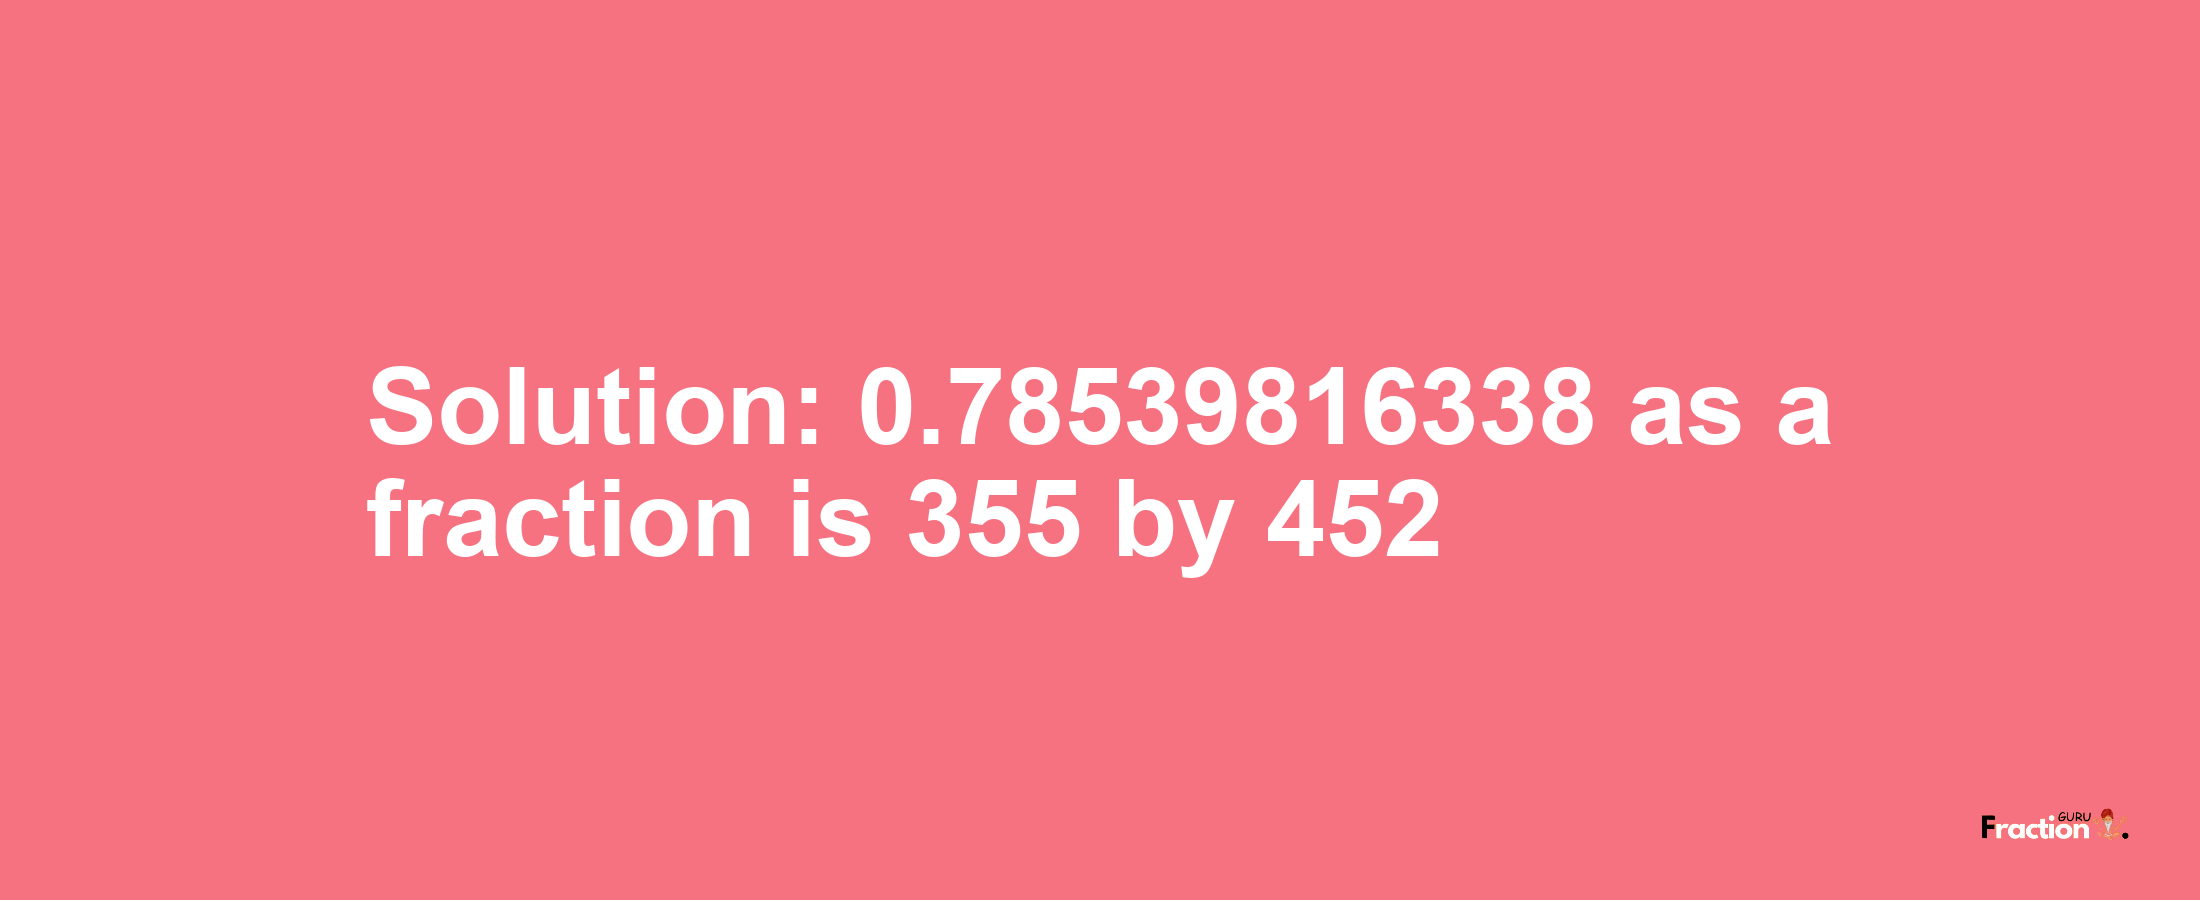 Solution:0.78539816338 as a fraction is 355/452